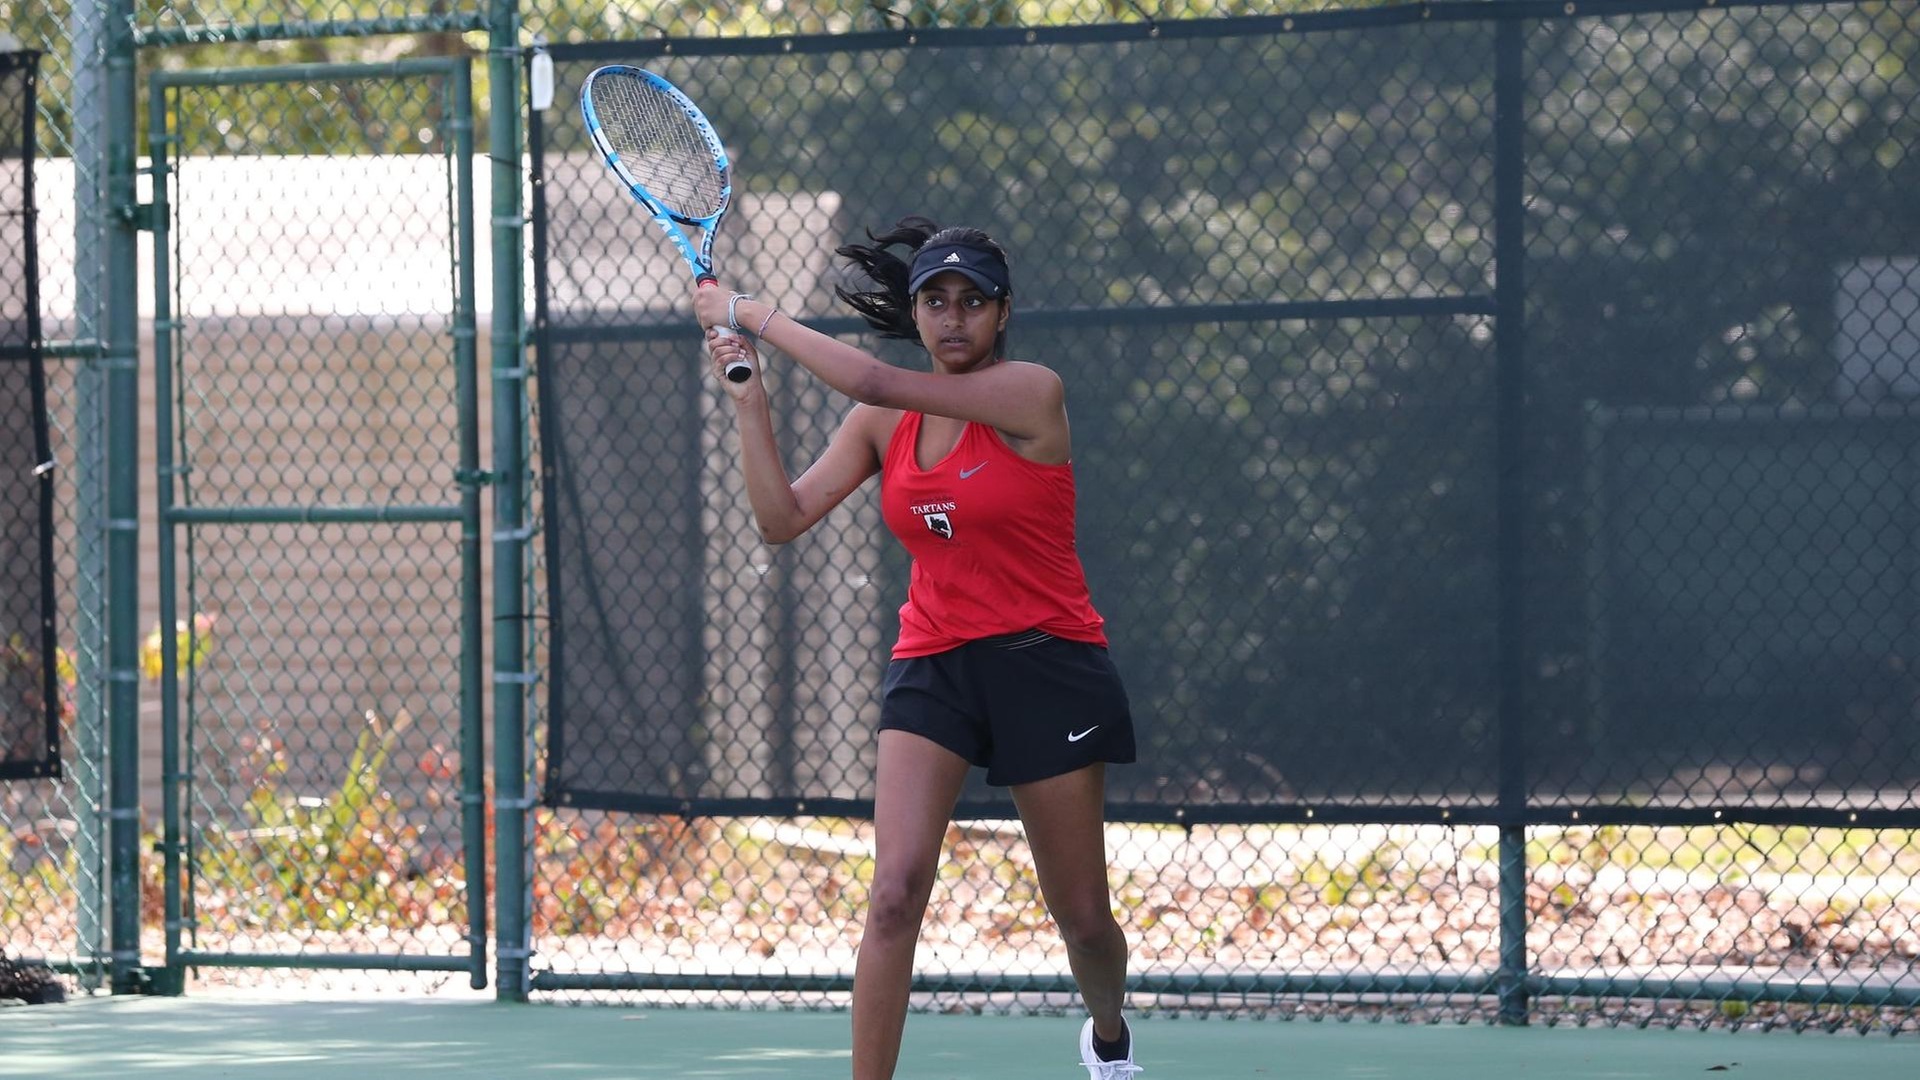 women's tennis player wearing a red top and black skirt with a black visor swings the racquet